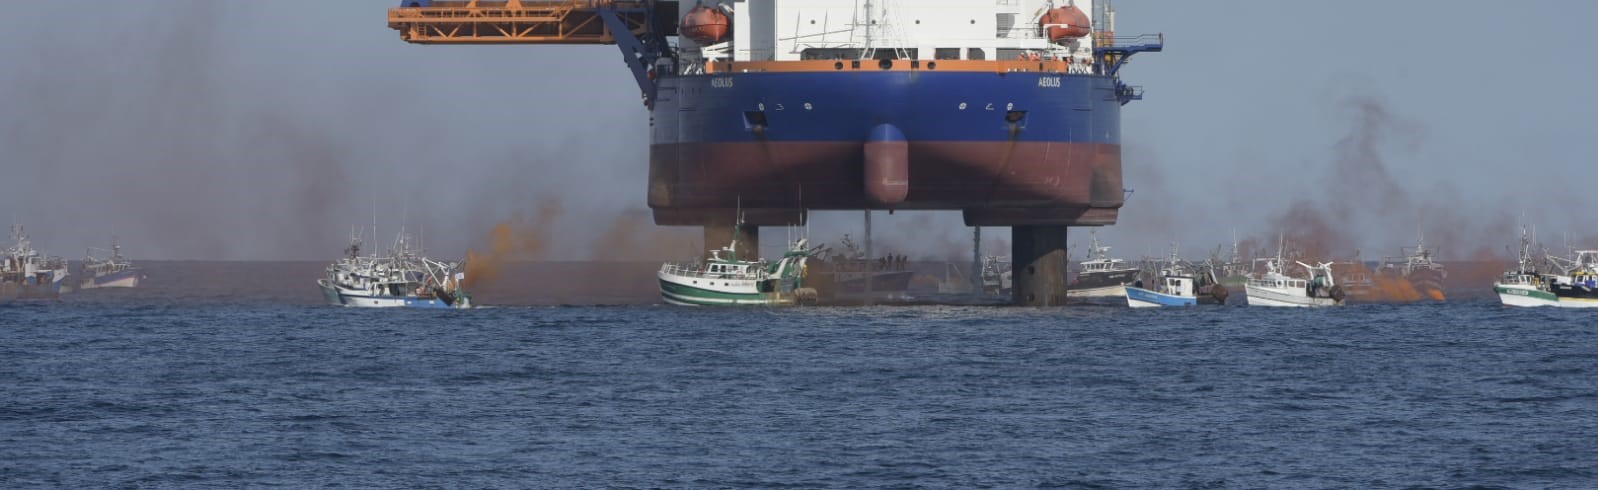 A photo showing distress flares launched from the fishing boats surrounding Aeolus vessel in Bay of Saint-Brieuc